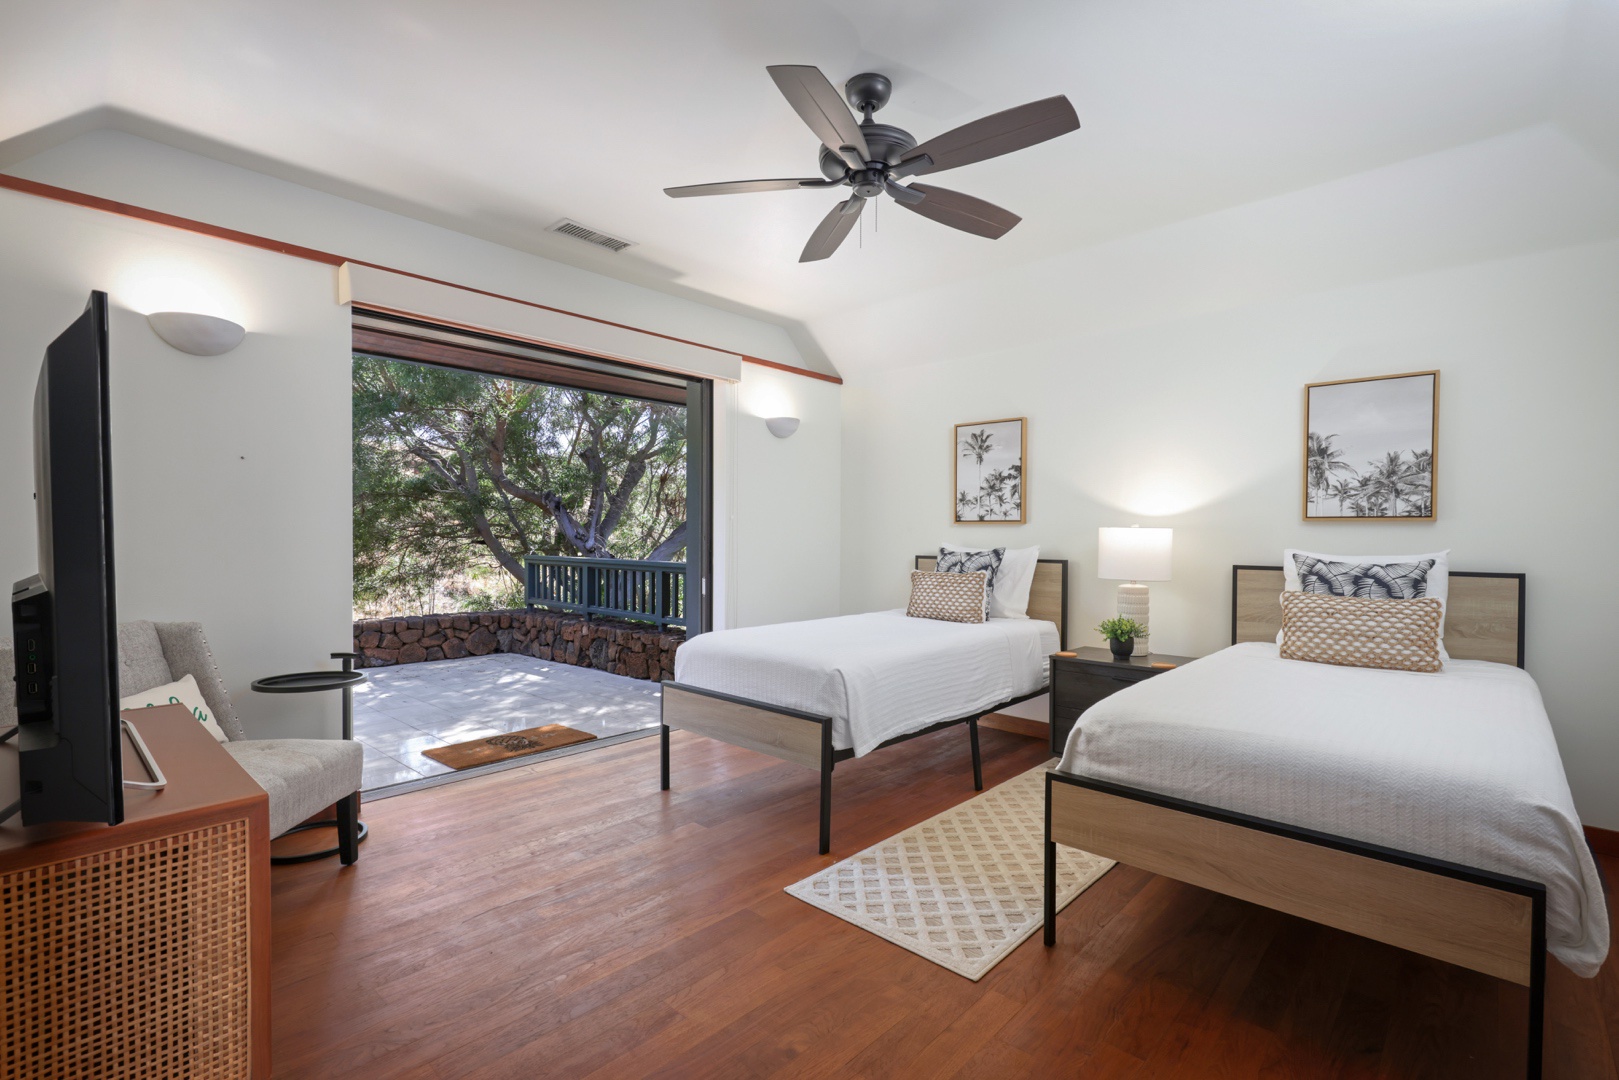 Kamuela Vacation Rentals, 4BD Fairways South Estate (29) at Mauna Kea Resort - The fourth bedroom offers two twin beds, a smart TV, en suite bath and a spacious private lanai to take in the greenery.